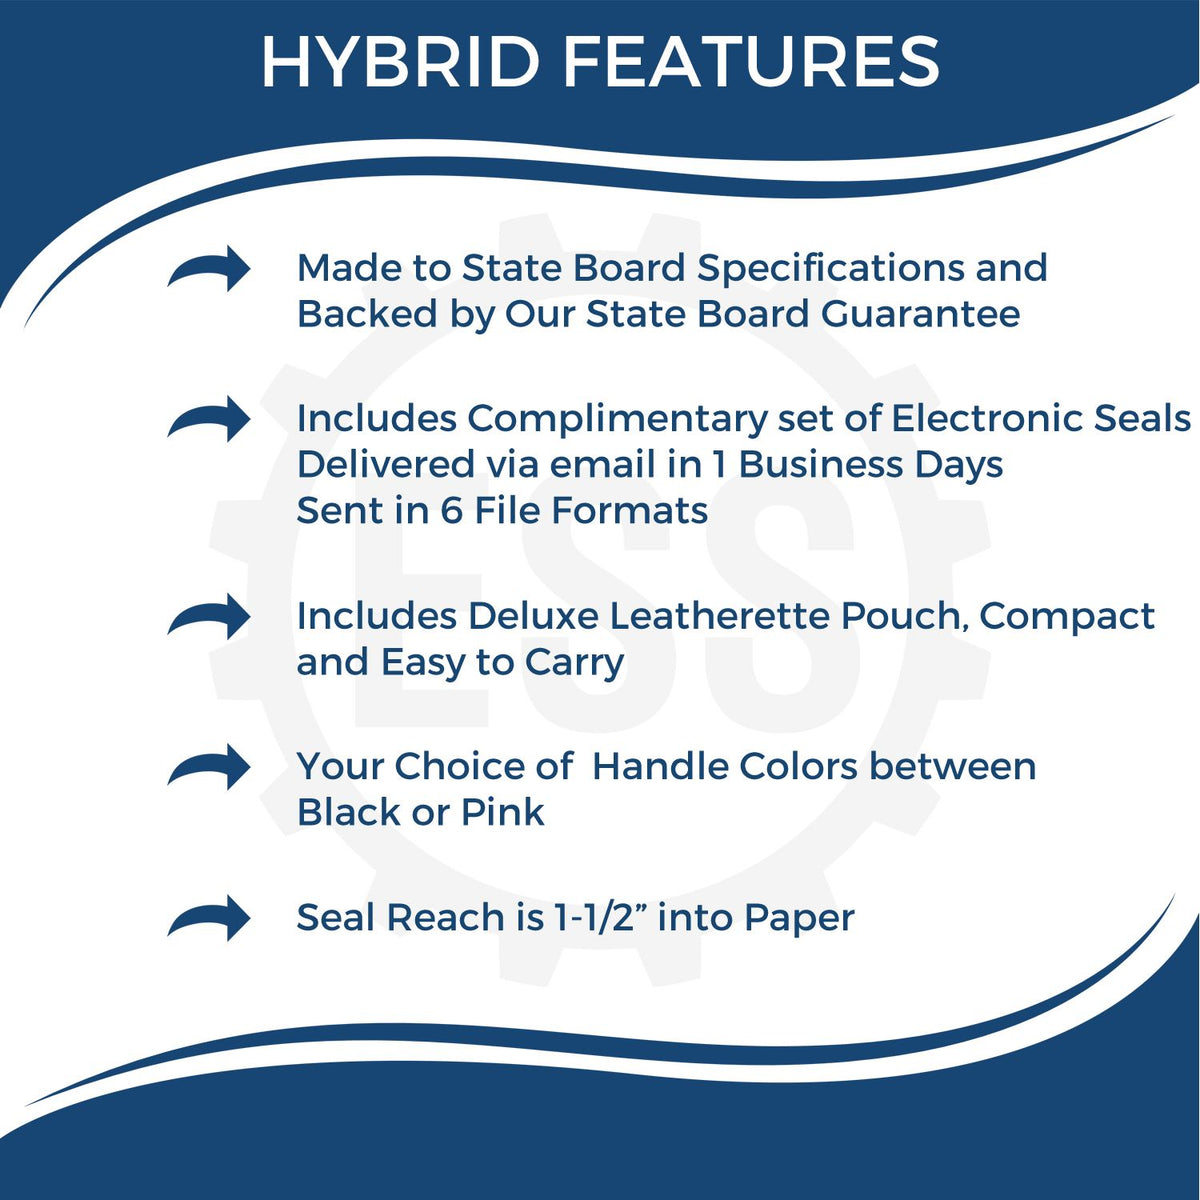 A picture of an infographic highlighting the selling points for the Hybrid Washington Engineer Seal